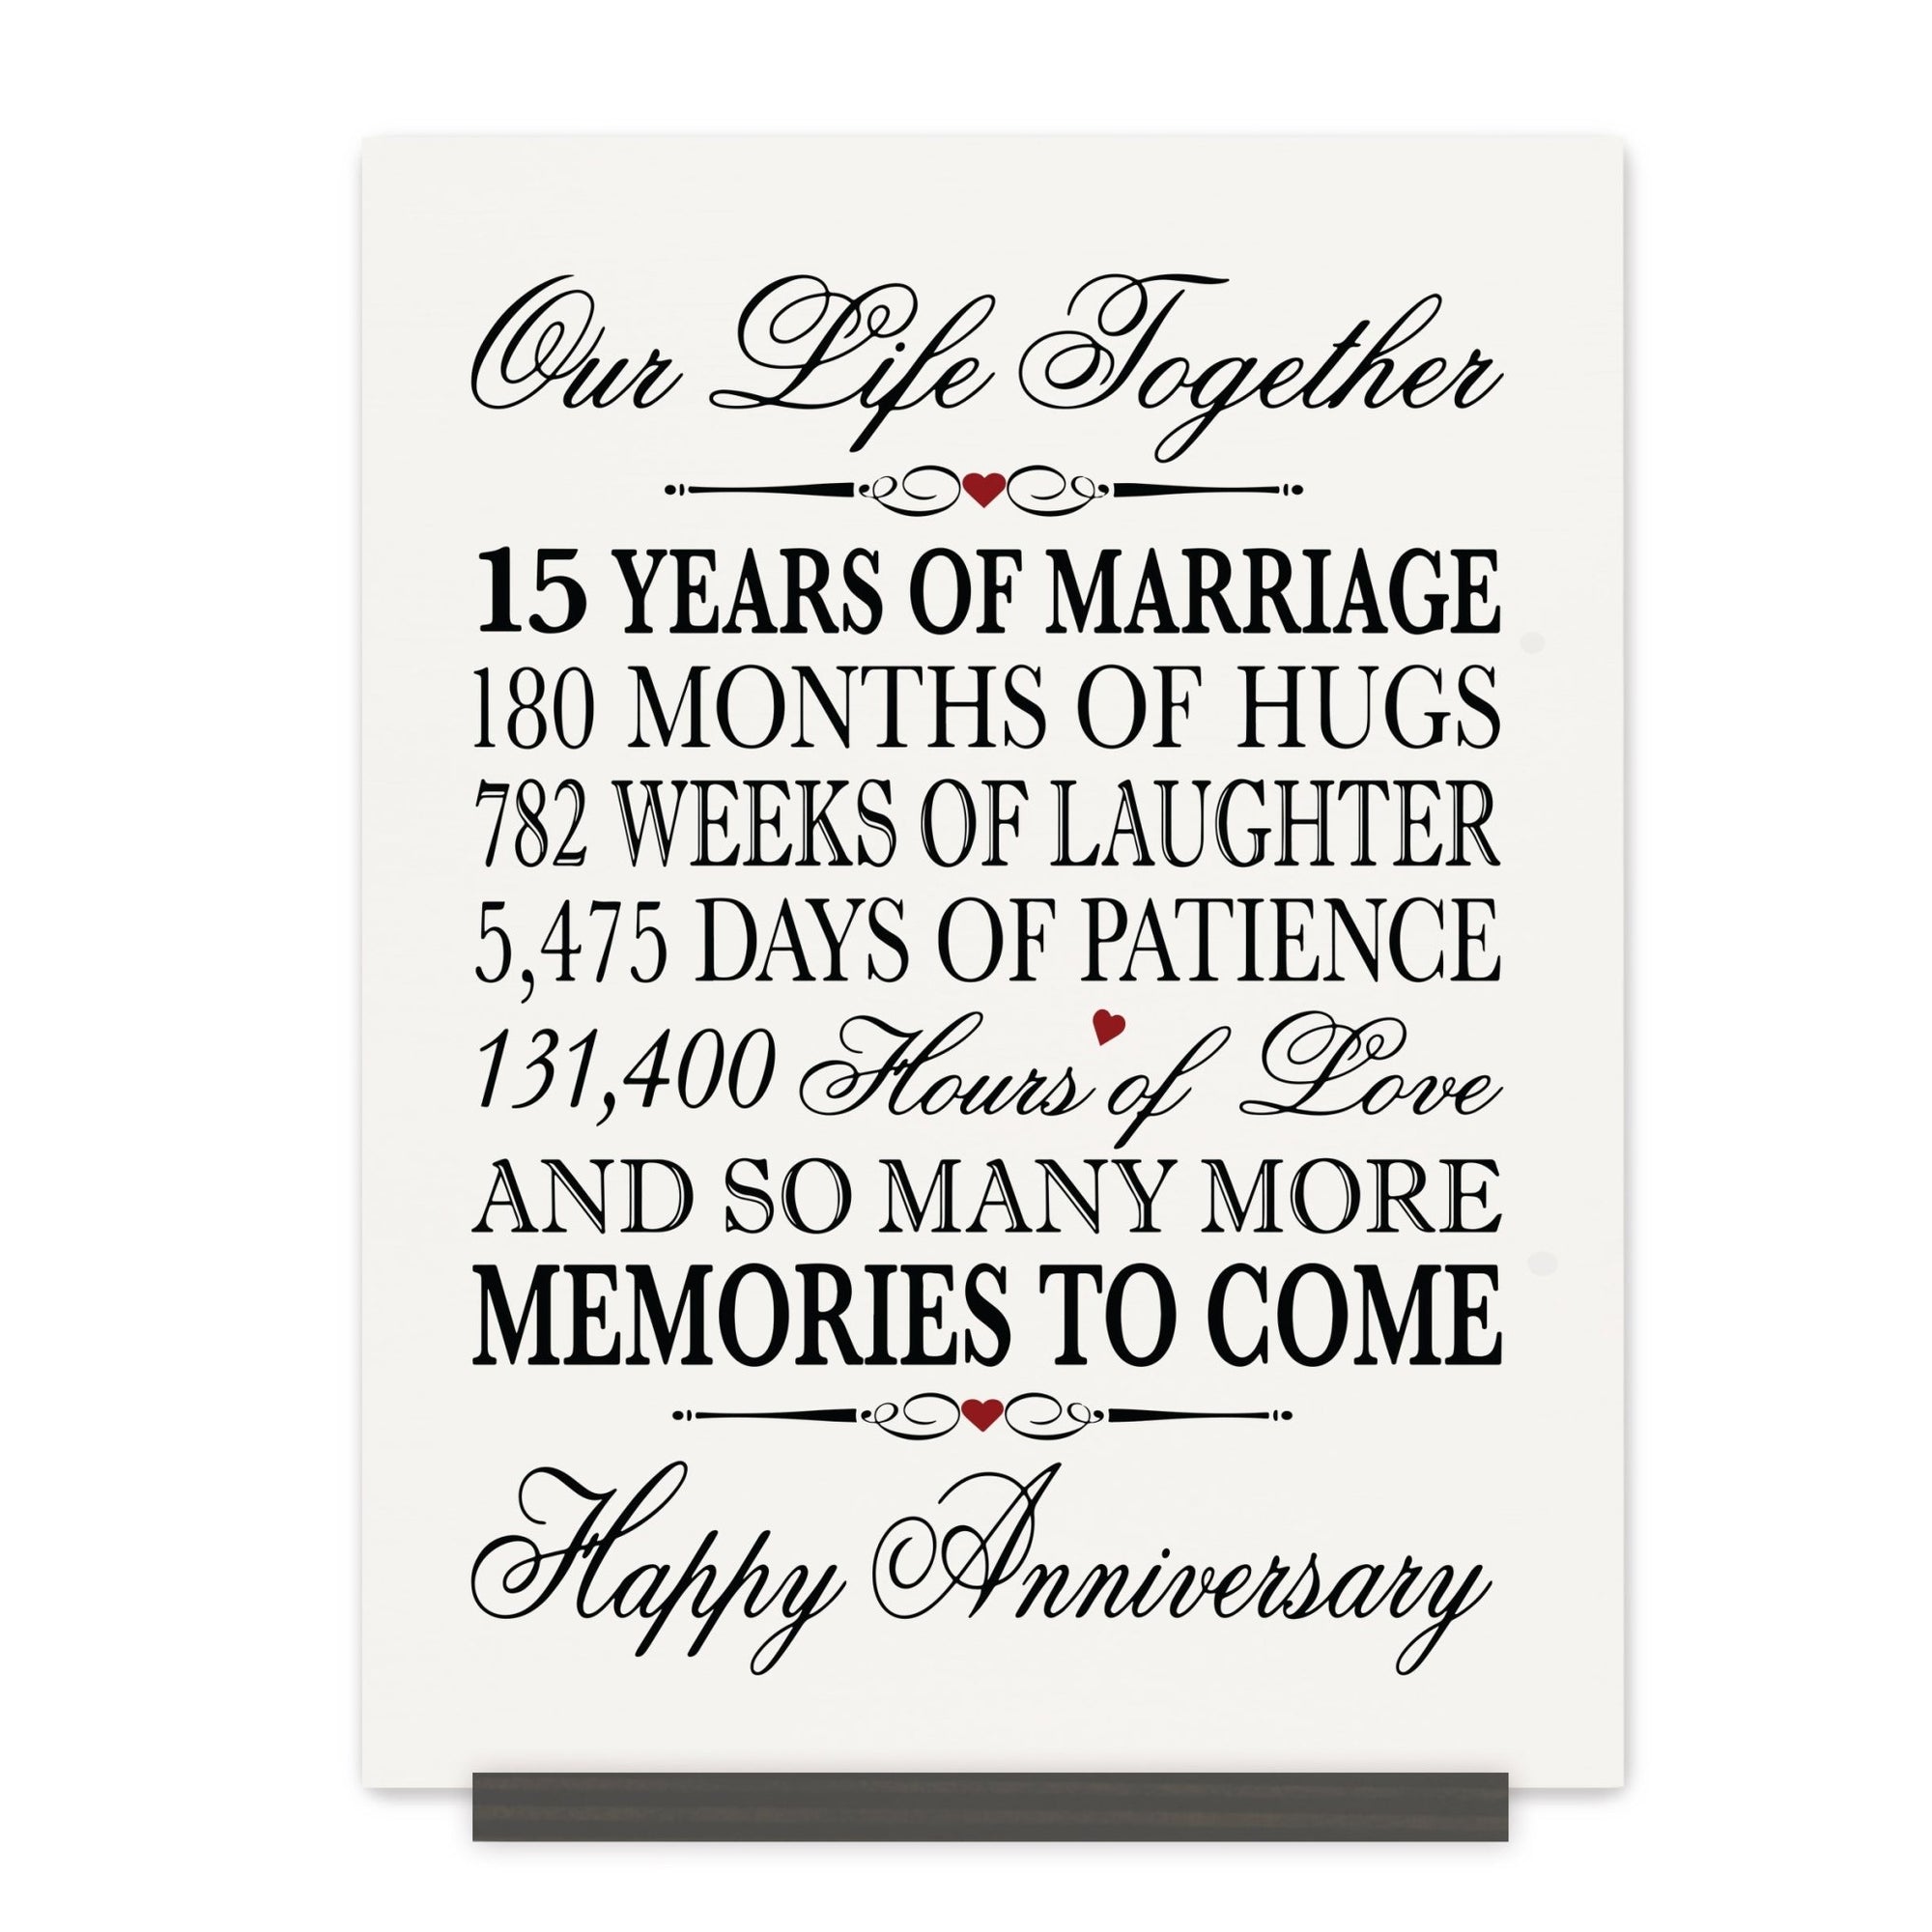 15th Wedding Anniversary Wall Plaque - Our Life Together - LifeSong Milestones